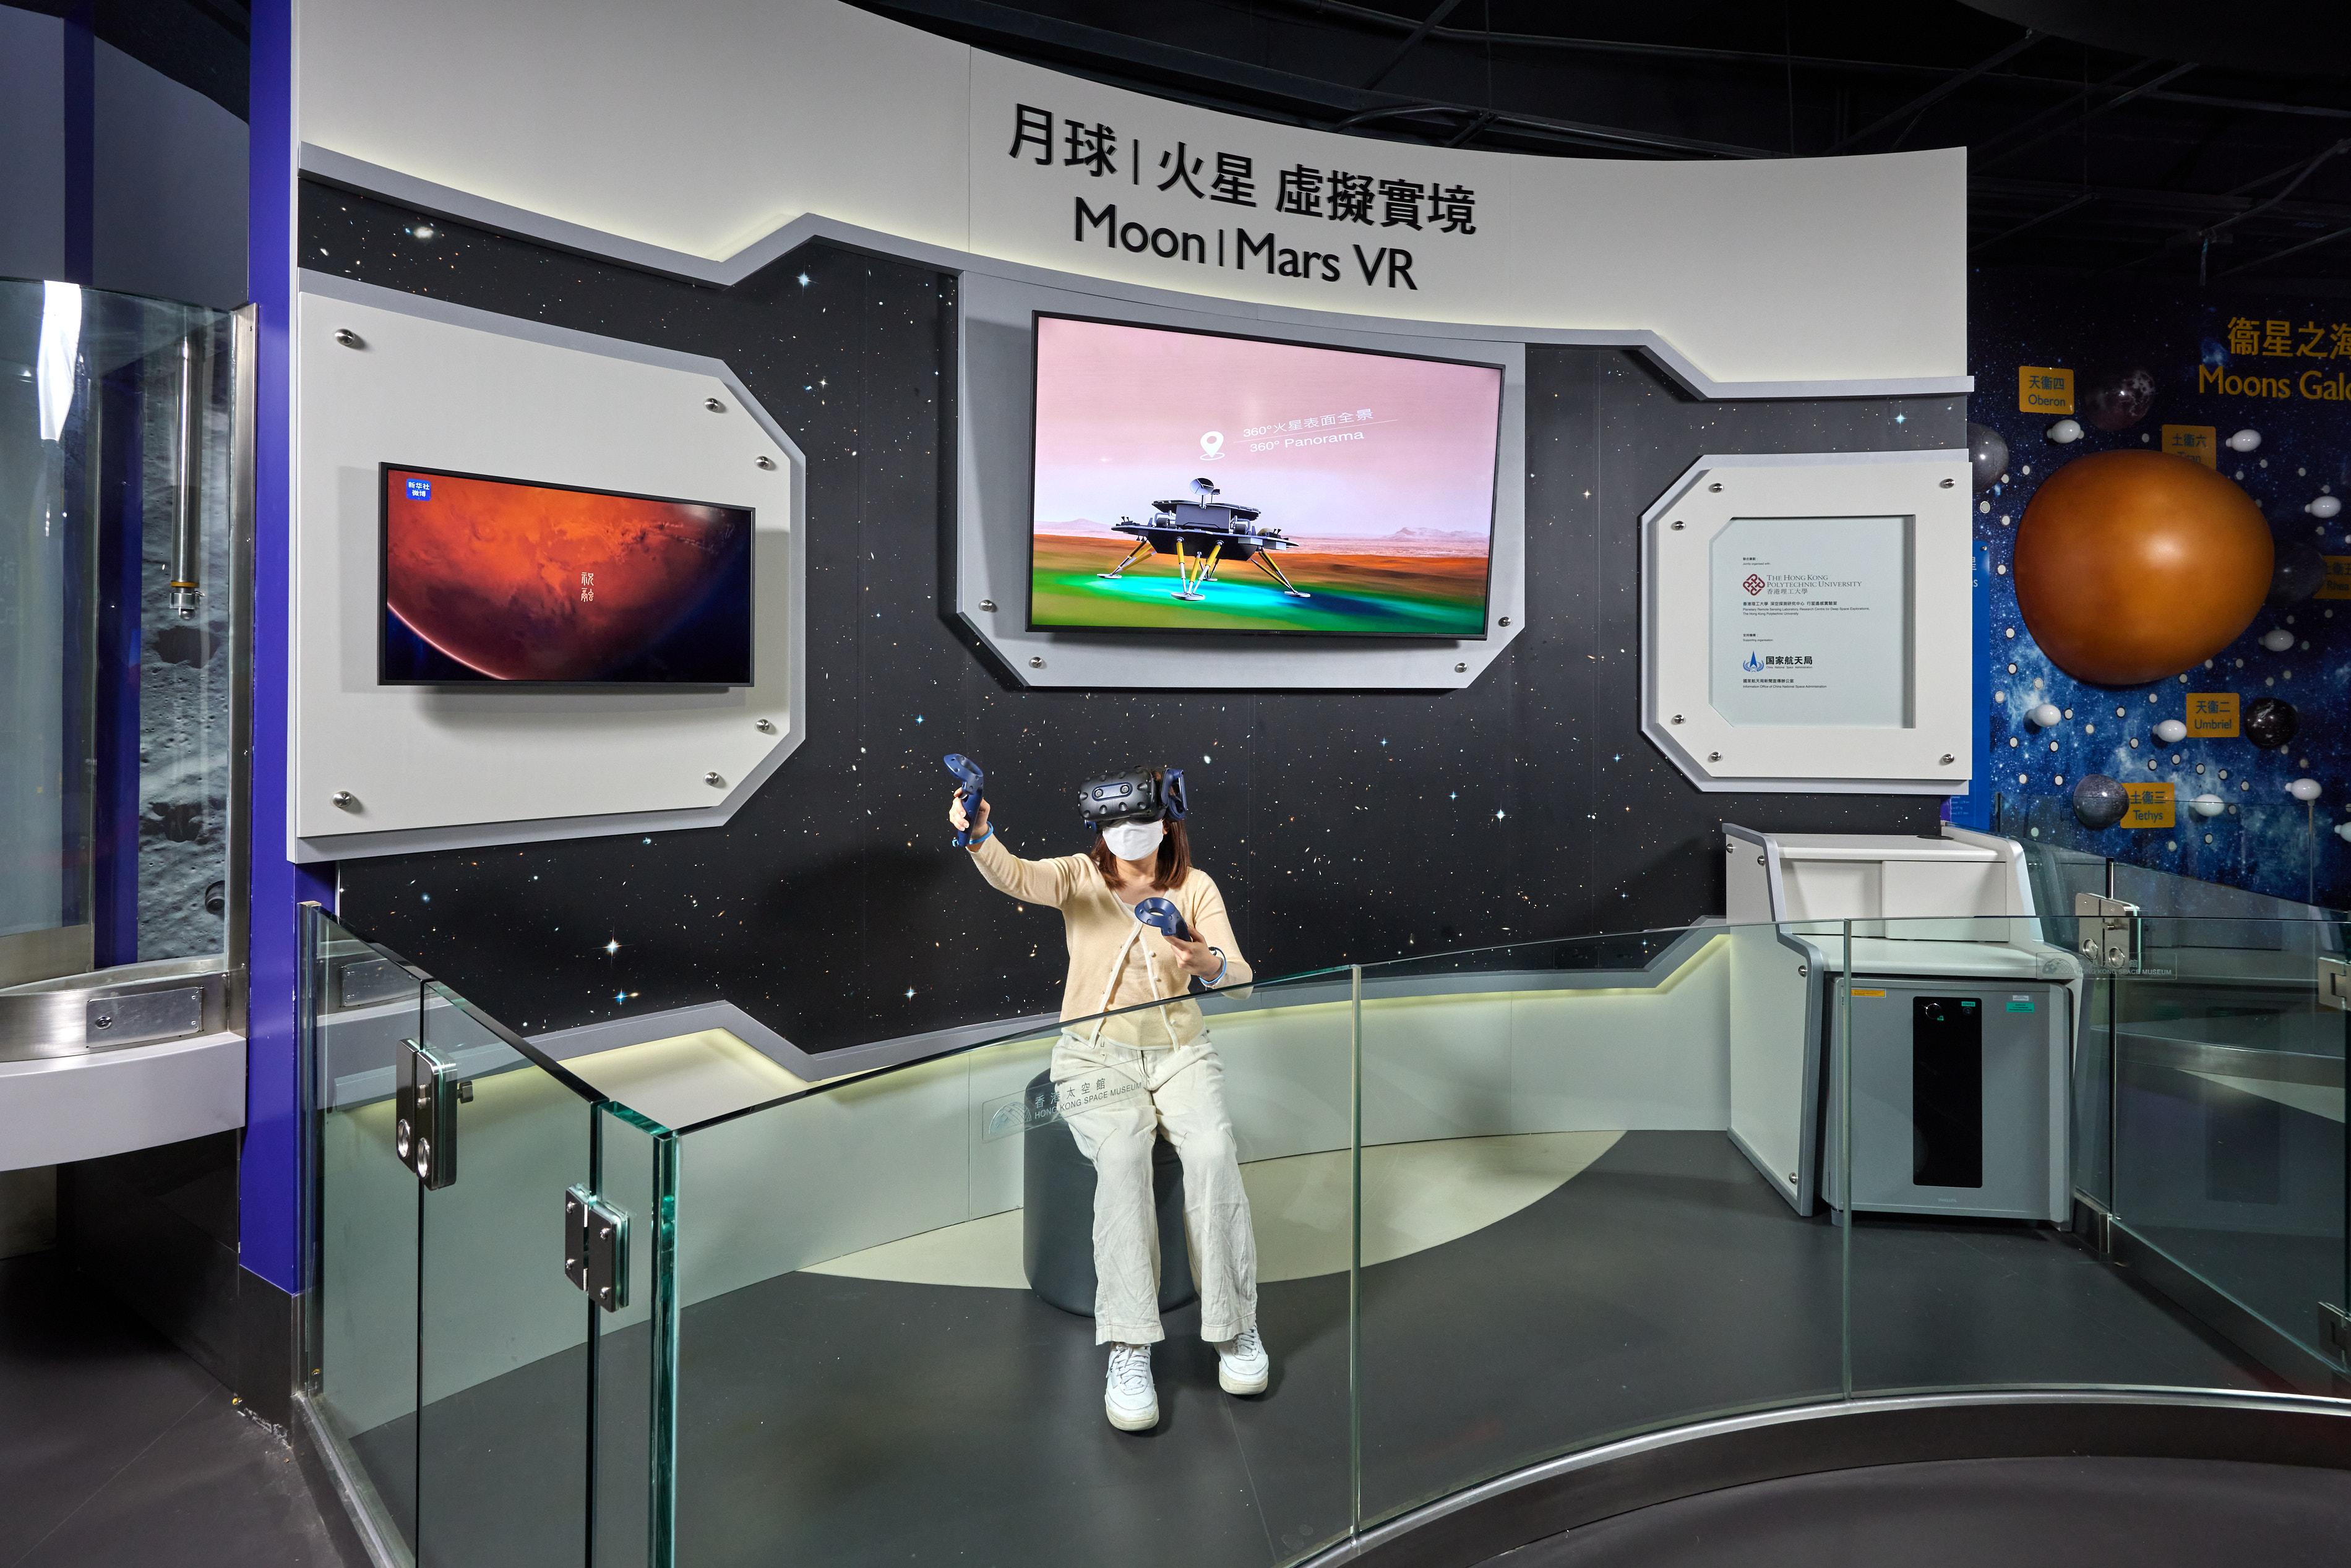 The Hong Kong Space Museum will introduce the "Moon | Mars VR" interactive exhibit on December 3 (Saturday). Visitors can understand spacewalking on the moon and Mars and explore the landing sites of Chang'e 4 and Tianwen-1.